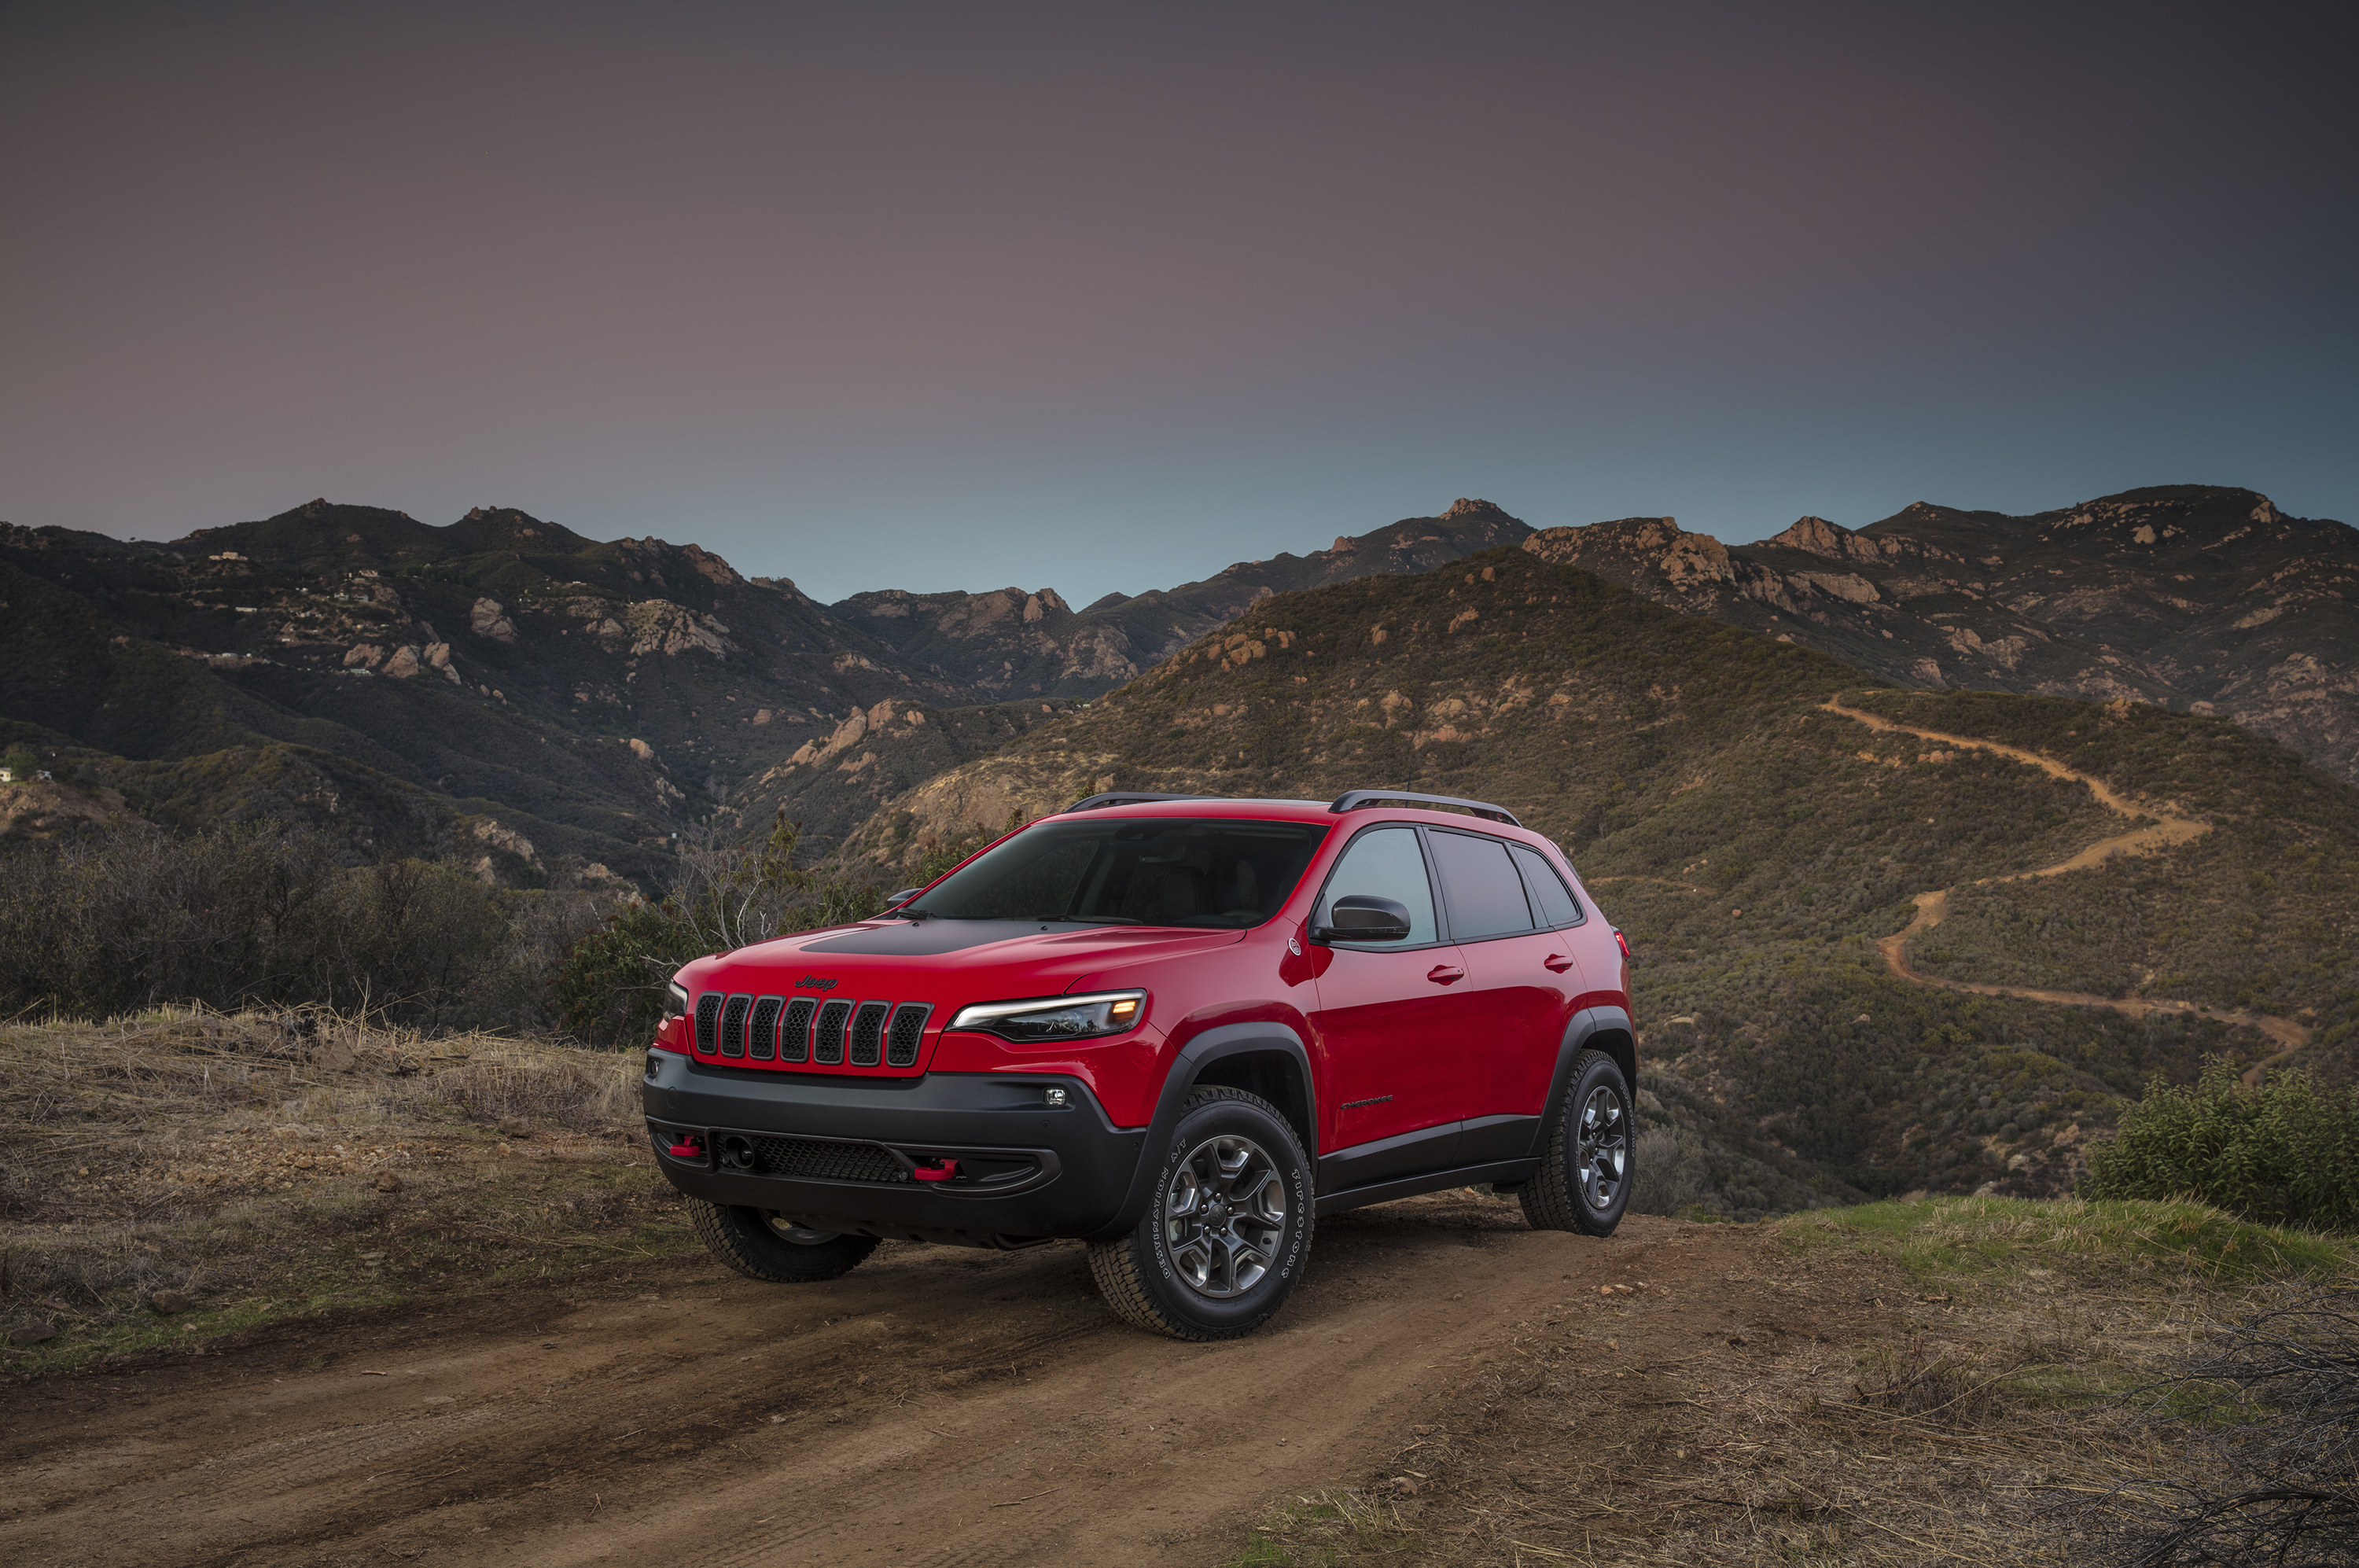 2019 Jeep® Cherokee Trailhawk off-roading in dirt